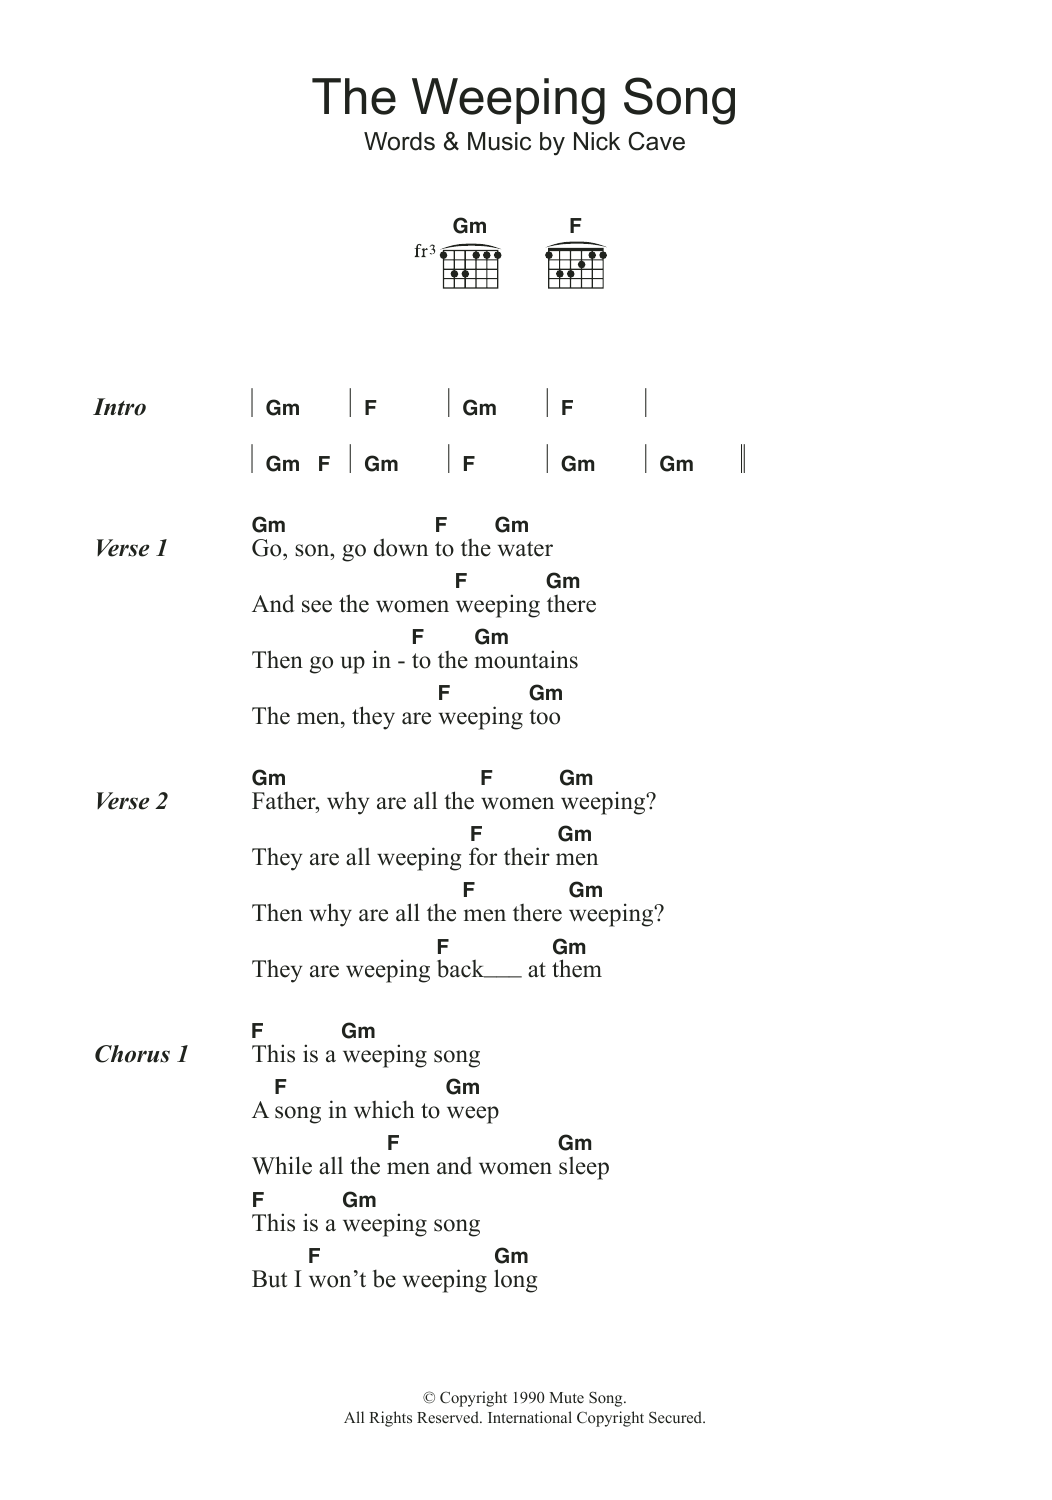 Download Nick Cave The Weeping Song Sheet Music